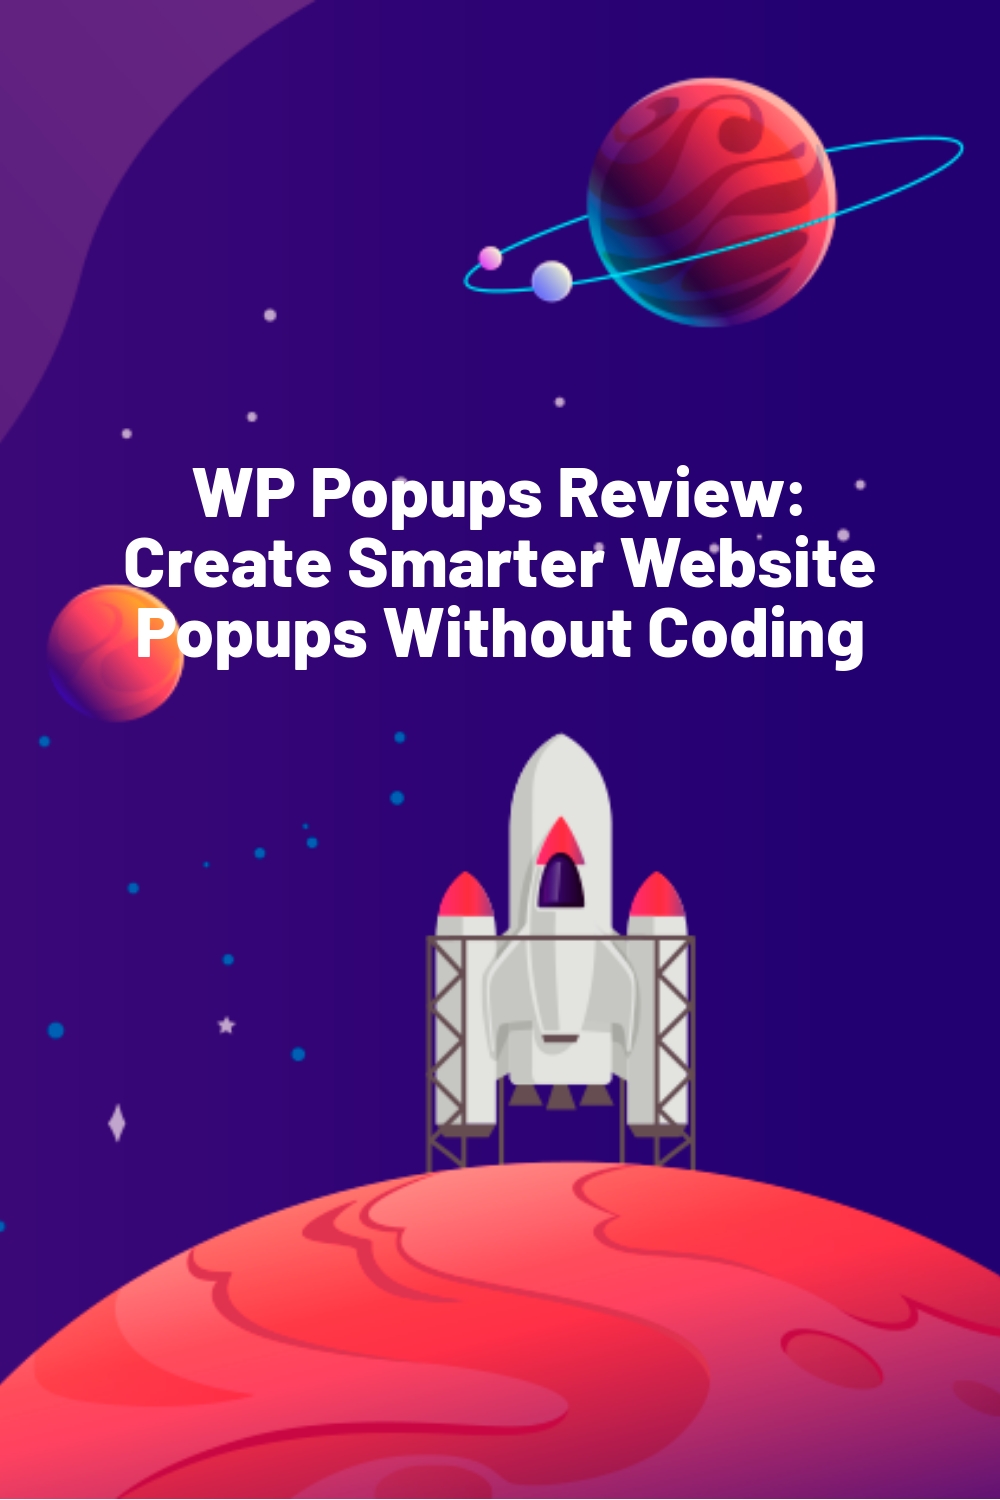 WP Popups Review: Create Smarter Website Popups Without Coding